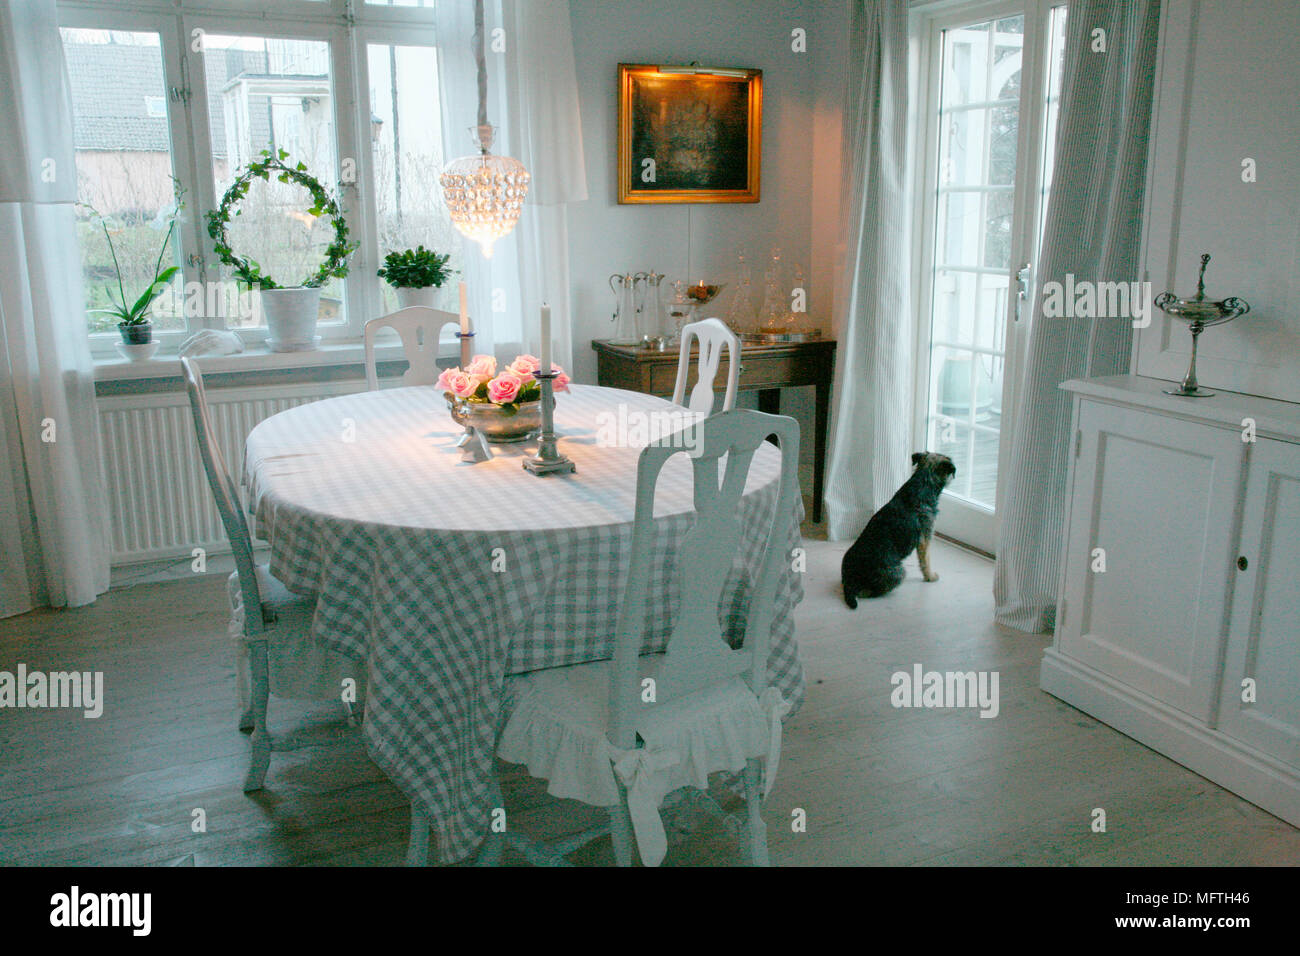 Table with check cloth and white wood chairs in Swedish style dining room Stock Photo